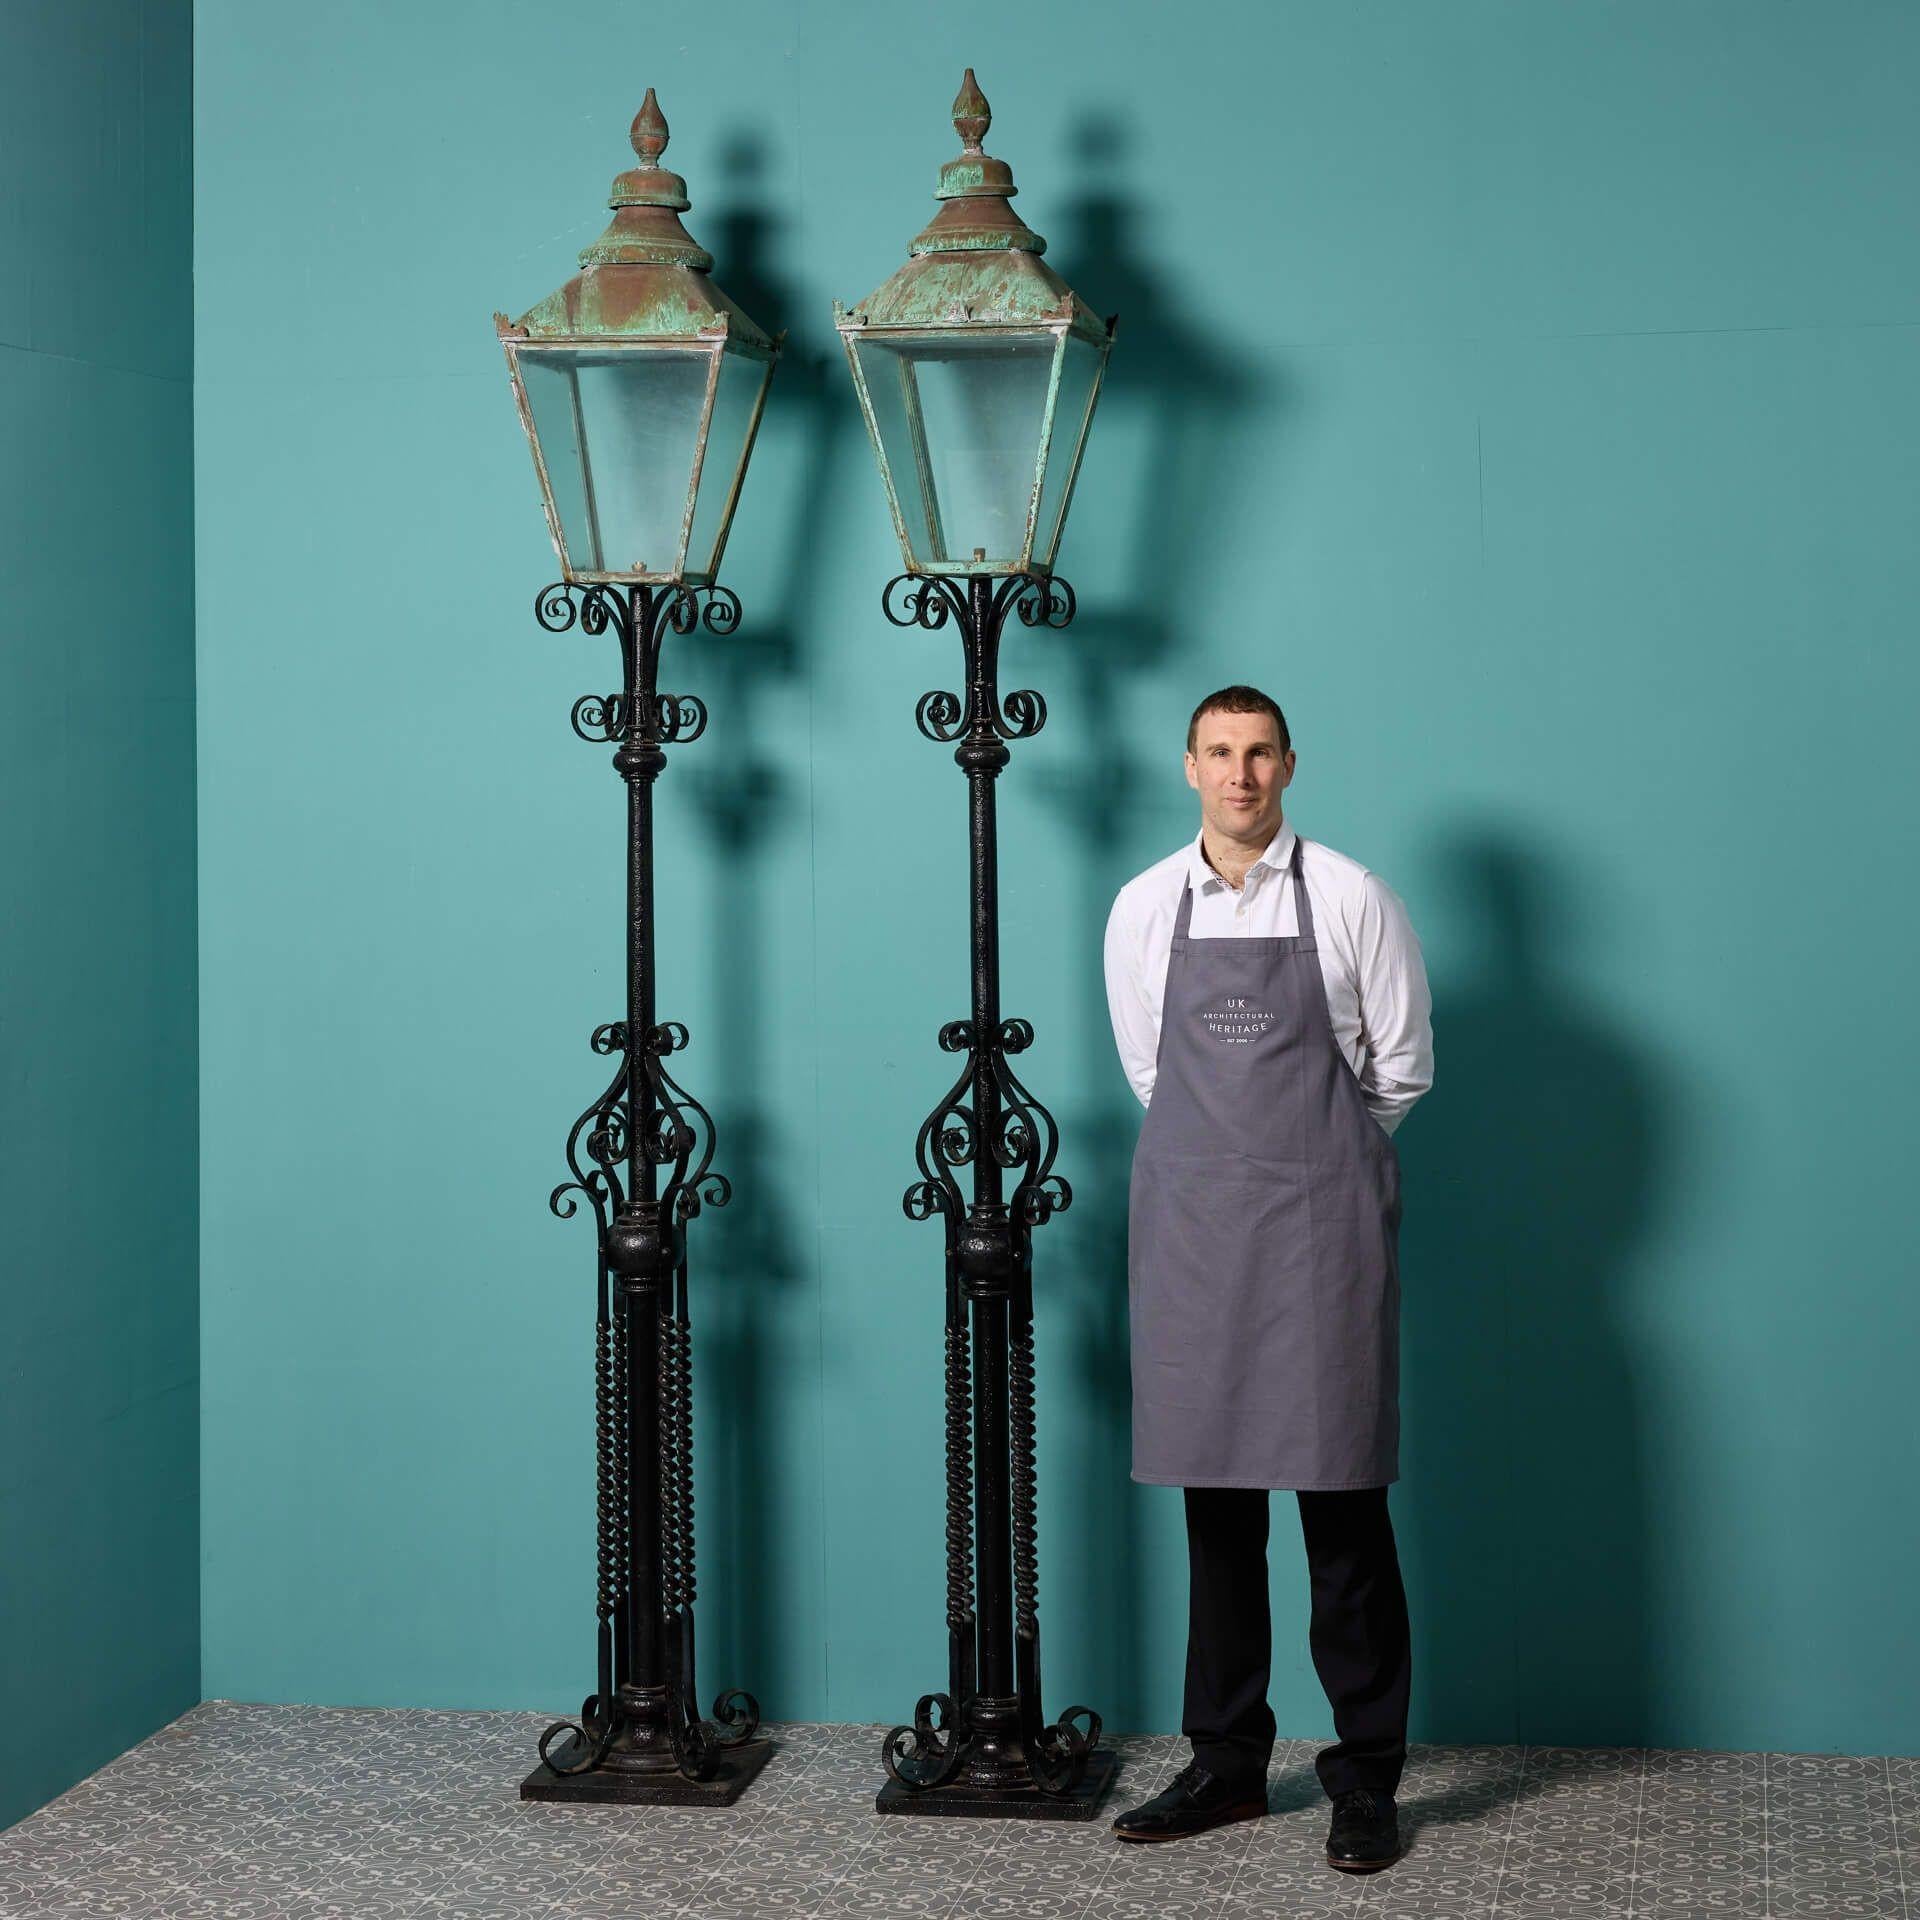 A pair of large antique Victorian lamp posts salvaged from a country house in Yorkshire. These decorative wrought and cast iron English lamp posts are beautifully styled with weathered copper tops, creating an unusual eye-catching verdigris